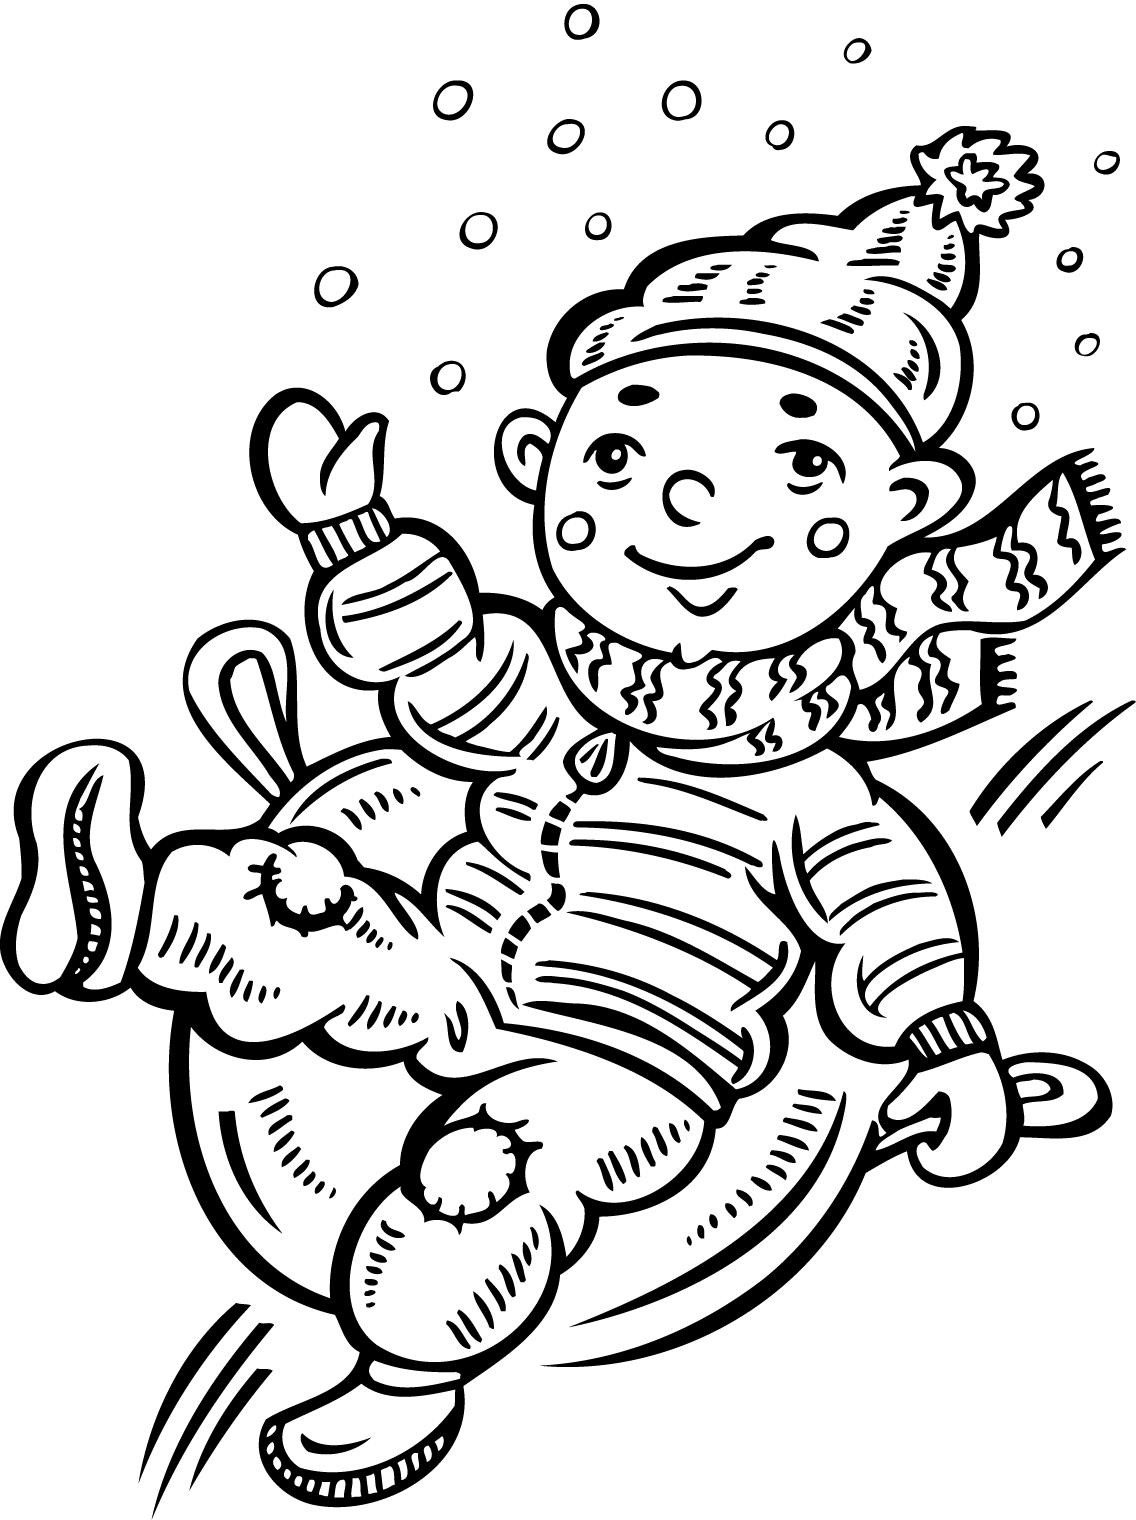 Child Coloring Page
 colouring sheets of a child sliding down a snow covered hill